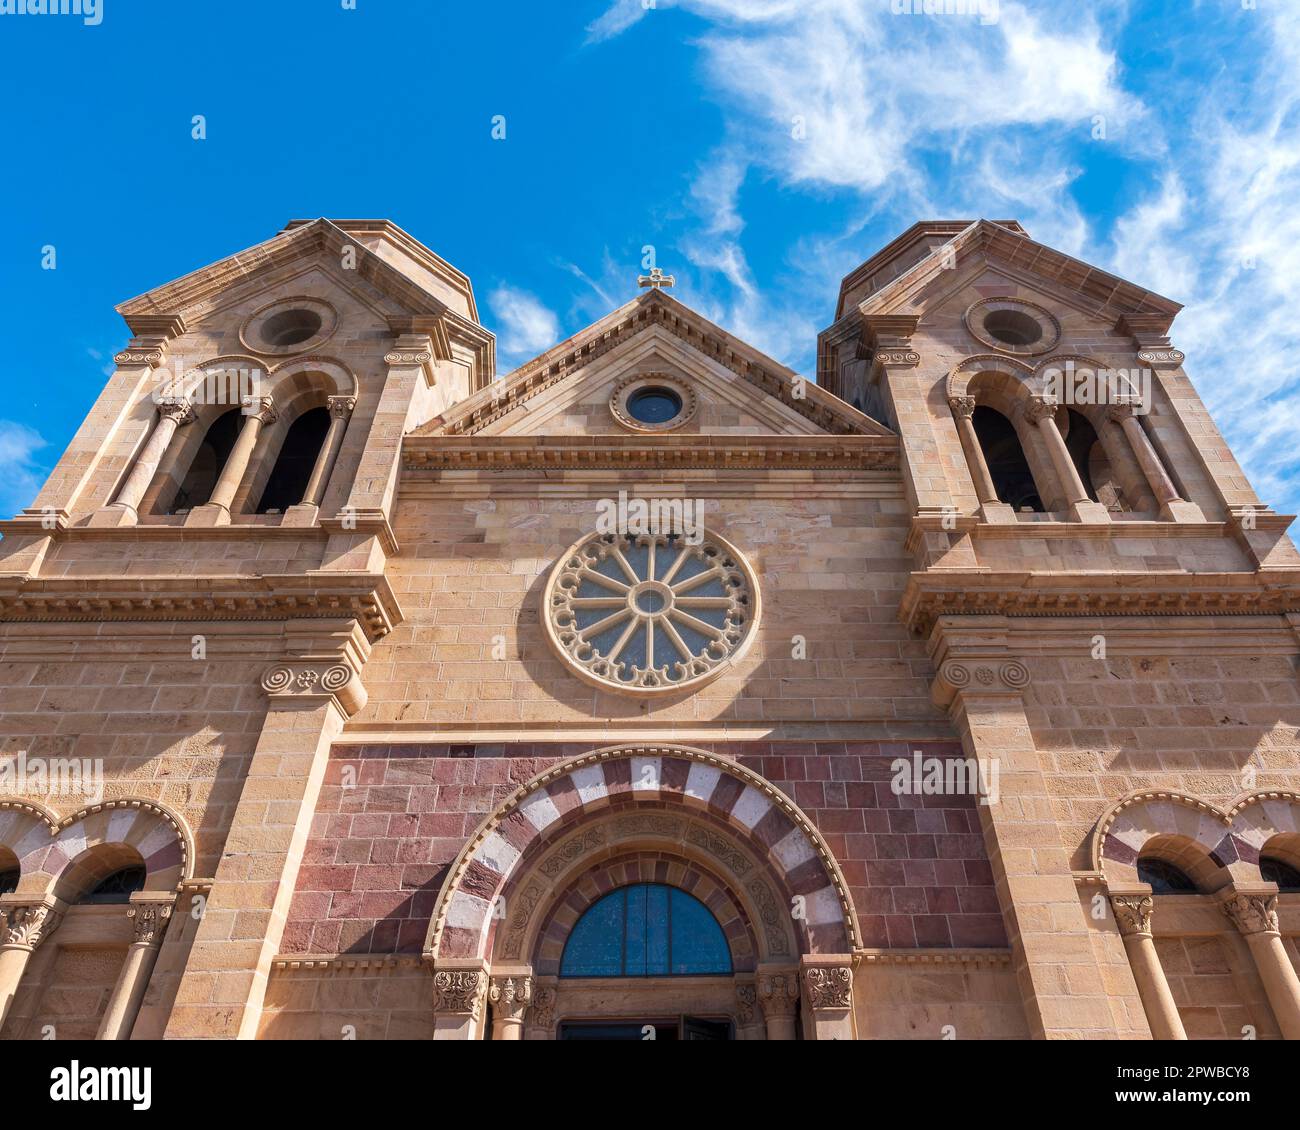 Horizontal image of the front facade of the Cathedral Basilica of St. Francis of Assisi in Santa Fe, New Mexico, with rose window and towers. Stock Photo